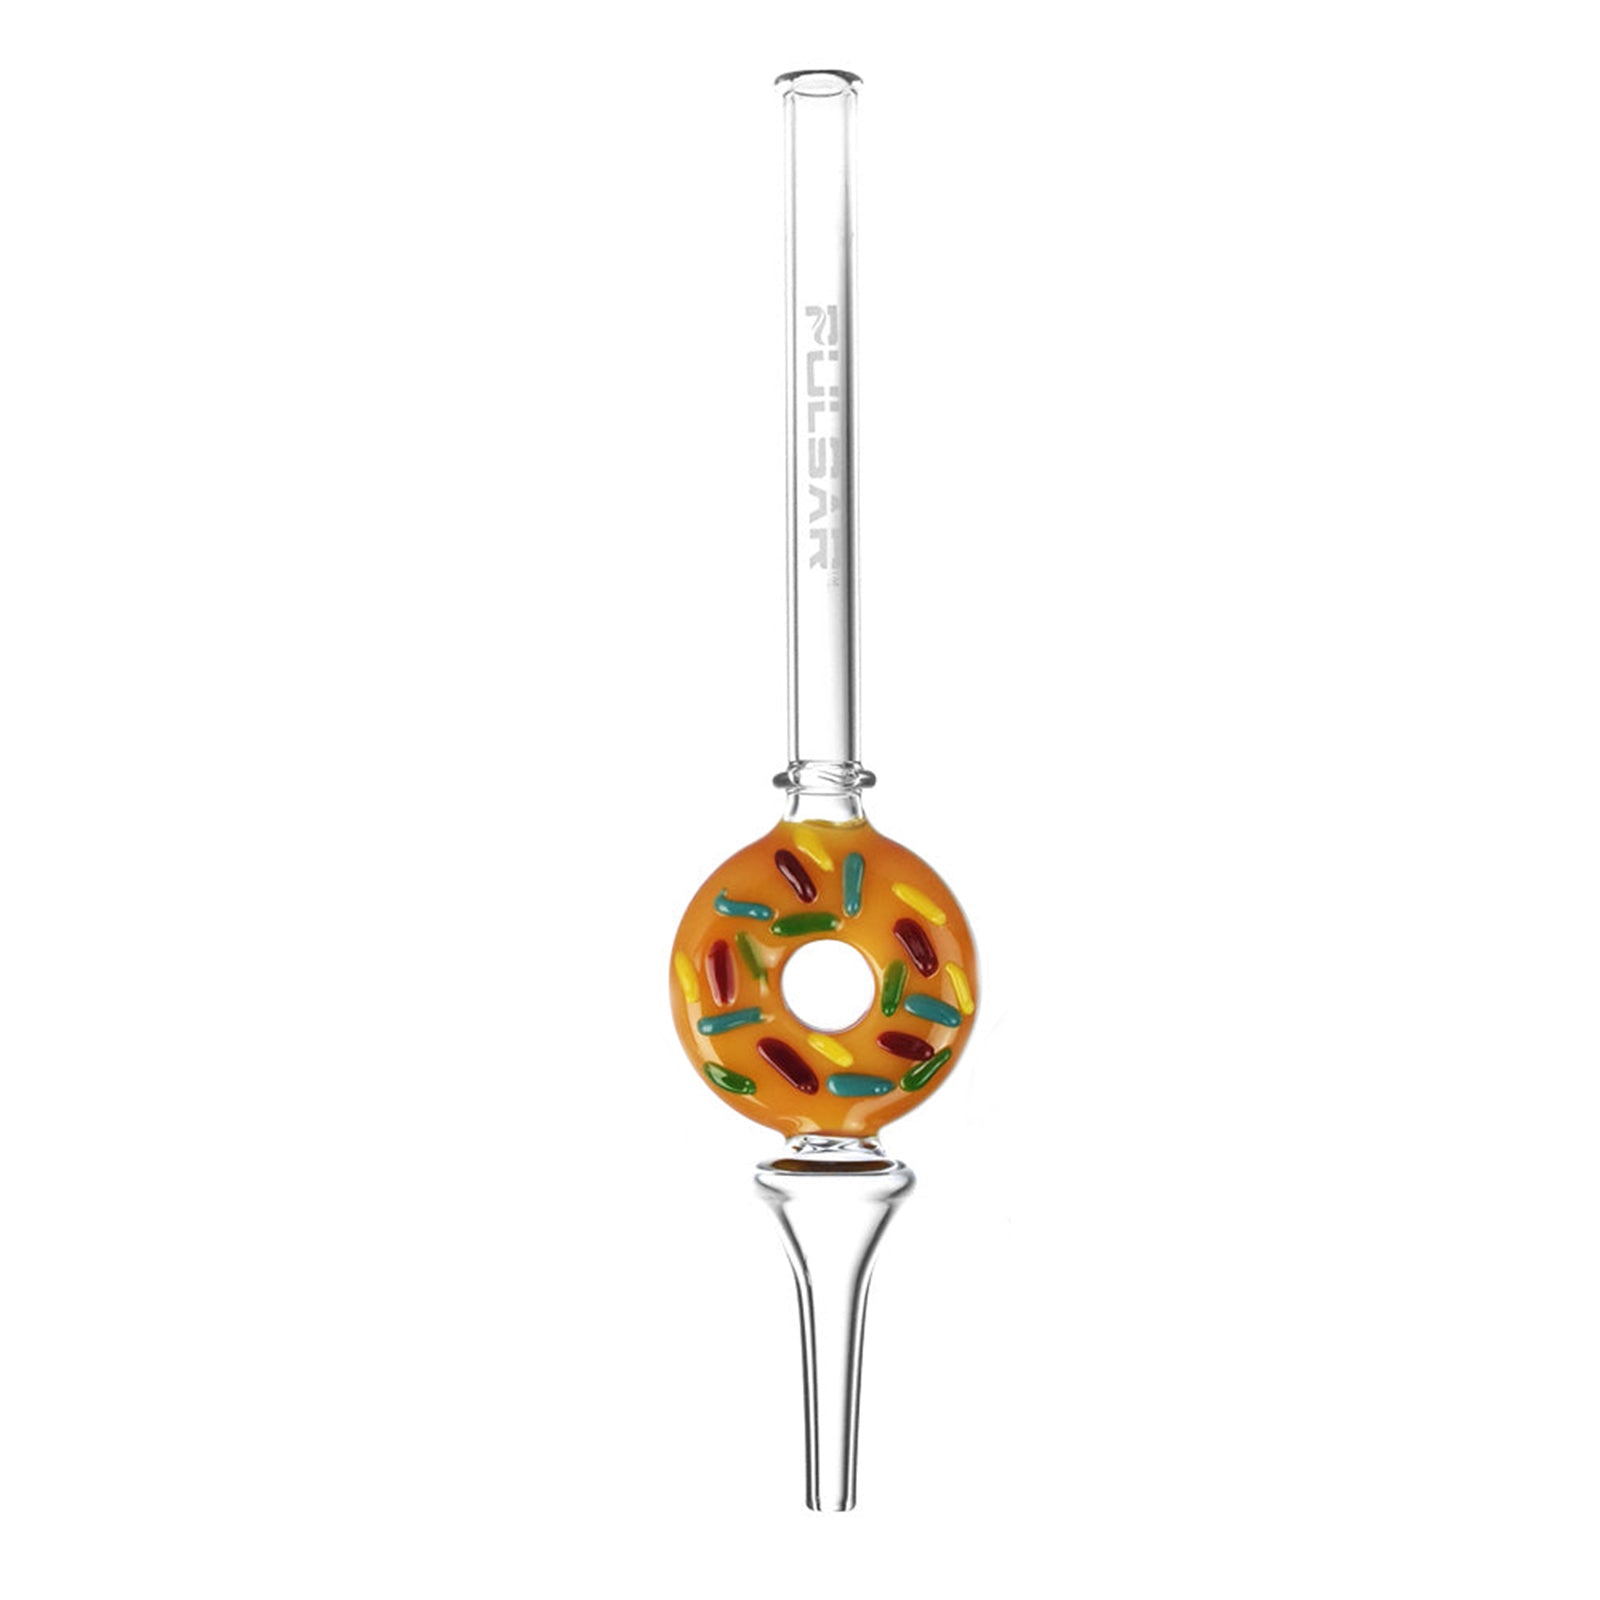 Pulsar Frosted Nectar Collector with Donut Diffuser - INHALCO